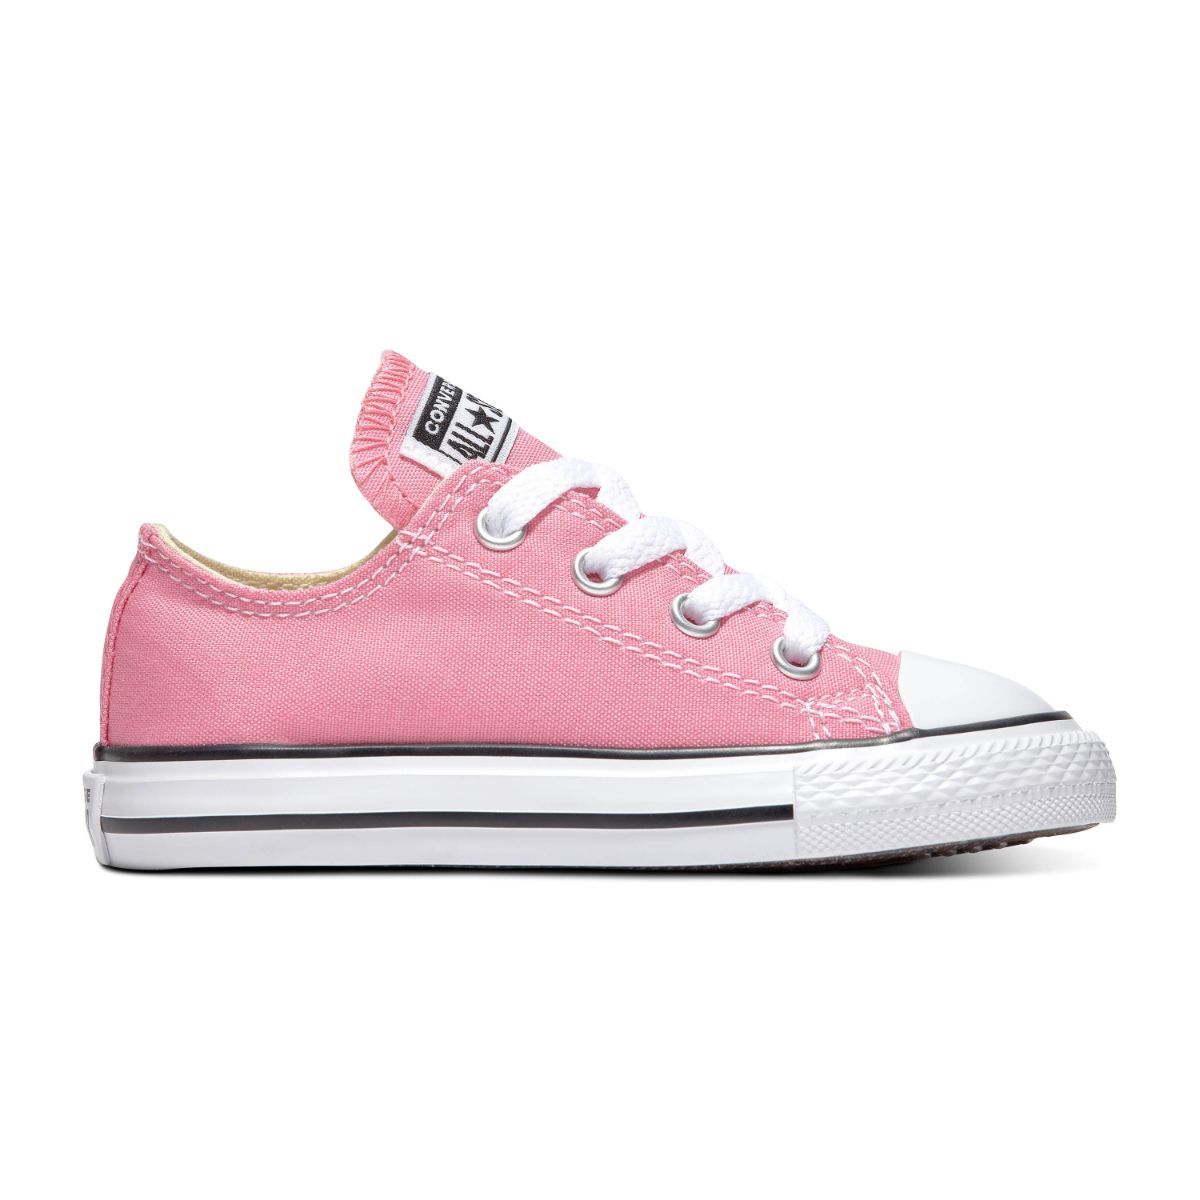 Toddler Chuck Taylor All Star Pink Low Top